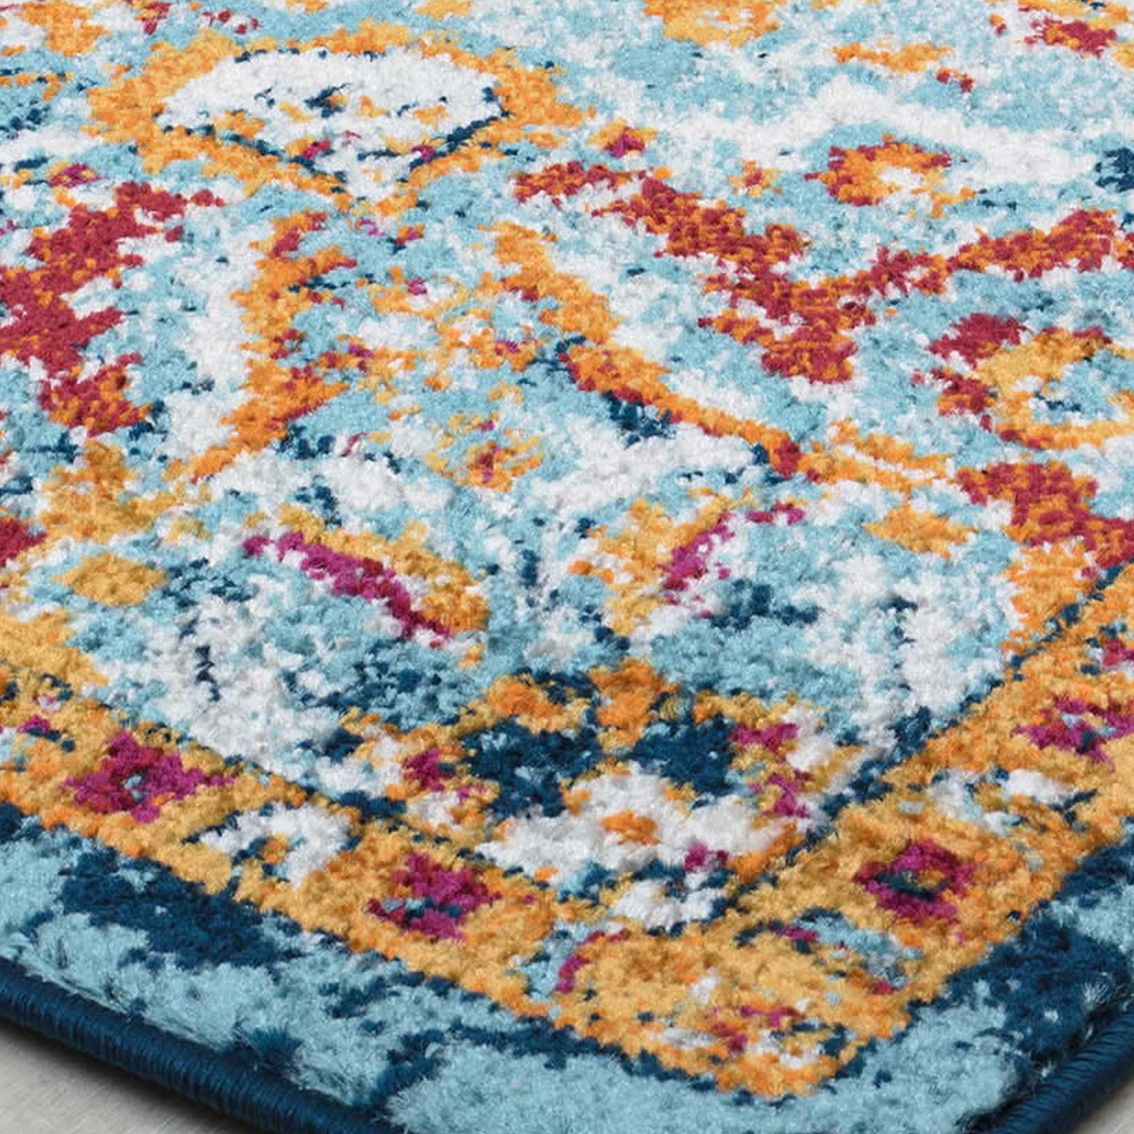 Rugs America Harper Sweet Nectar Abstract Vintage Area Rug - Image 8 of 8